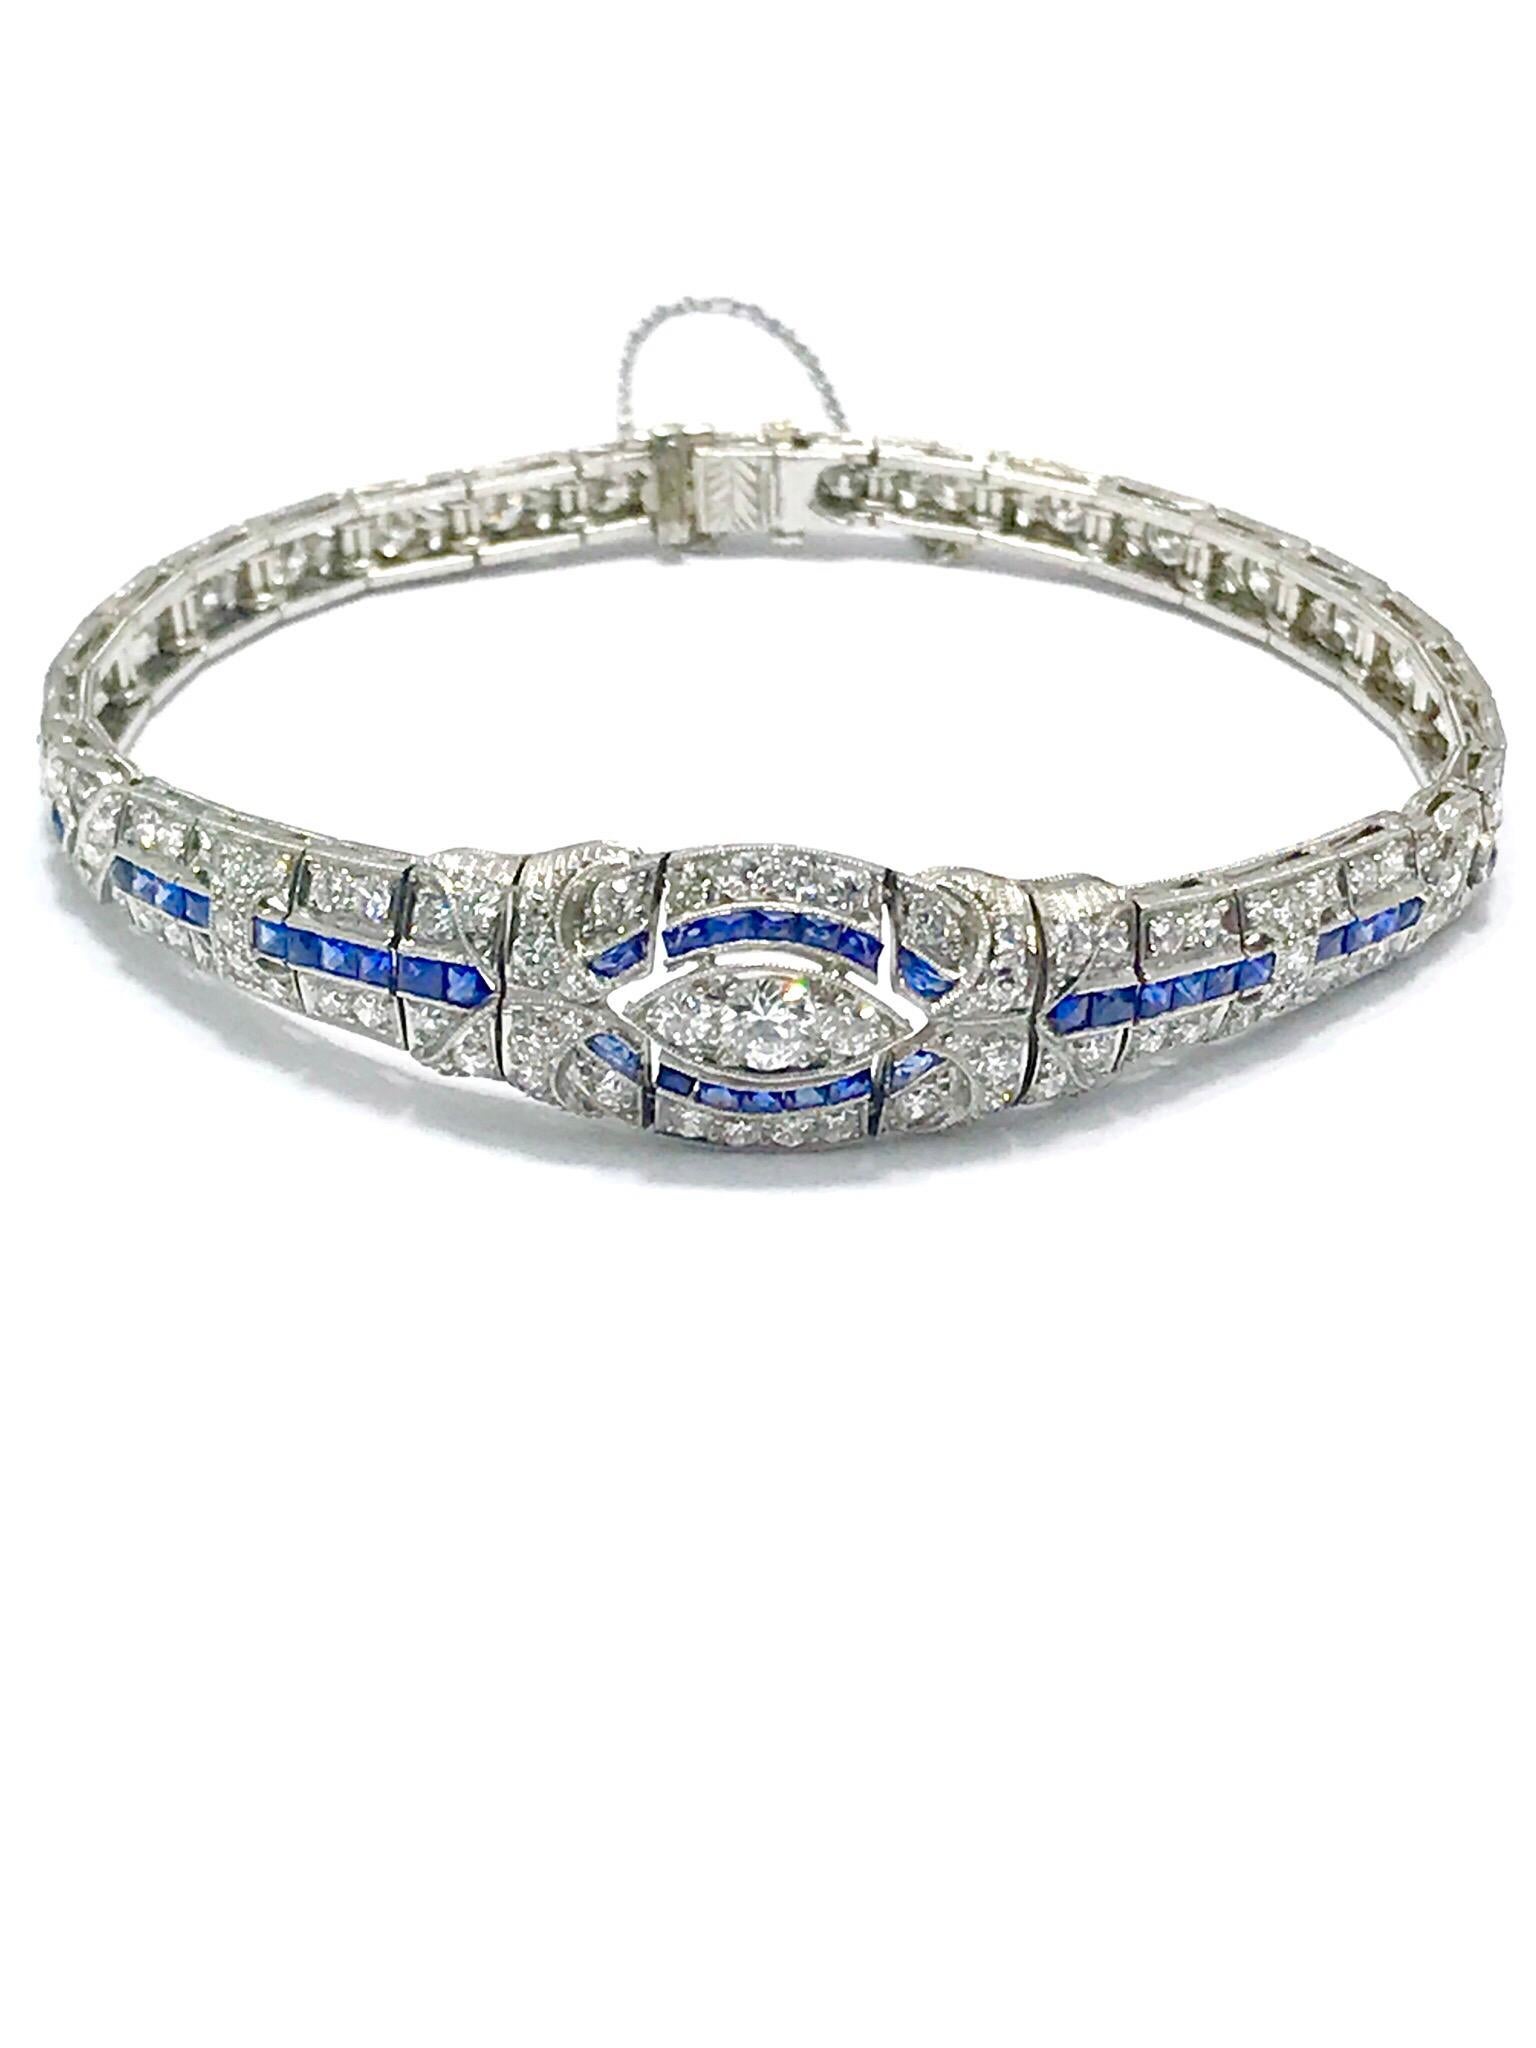 This is an absolutely gorgeous Art Deco diamond and sapphire platinum bracelet.  The bracelet contains 97 round diamonds for a total weight of 3.00 carats, accented by channel set french cut sapphires in hand crafted filigree beaded edge platinum. 